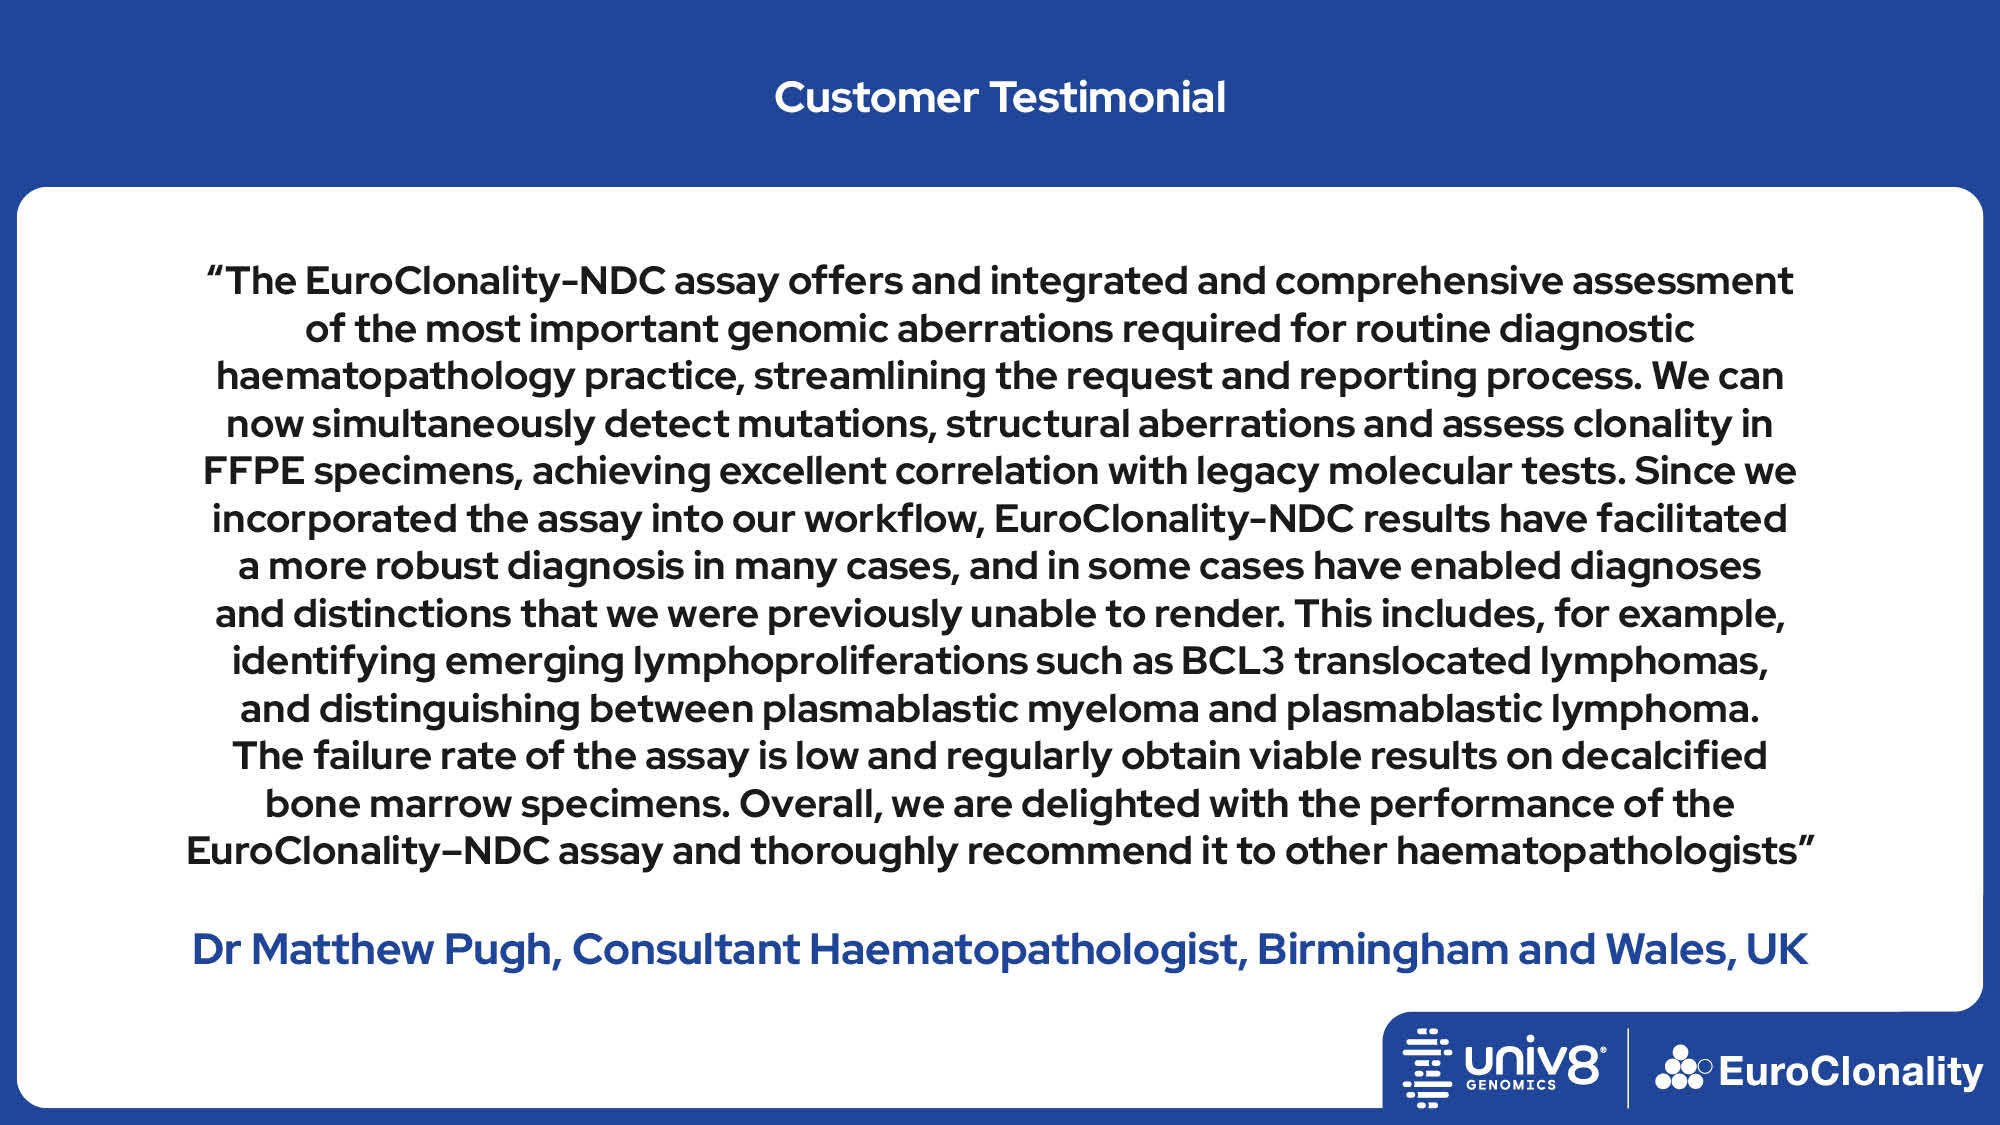 “The EuroClonality-NDC assay offers and integrated and comprehensive assessment of the most important genomic aberrations required for routine diagnostic haematopathology practice, streamlining the request and reporting process. We can now simultaneously detect mutations, structural aberrations and assess clonality in FFPE specimens, achieving excellent correlation with legacy molecular tests. Since we incorporated the assay into our workflow, EuroClonality-NDC results have facilitated a more robust diagnosis in many cases, and in some cases have enabled diagnoses and distinctions that we were previously unable to render. This includes, for example, identifying emerging lymphoproliferations such as BCL3 translocated lymphomas, and distinguishing between plasmablastic myeloma and plasmablastic lymphoma. The failure rate of the assay is low and regularly obtain viable results on decalcified bone marrow specimens. Overall, we are delighted with the performance of the EuroClonality–NDC assay and thoroughly recommend it to other haematopathologists” Dr Matthew Pugh, Consultant Haematopathologist, Birmingham and Wales, UK